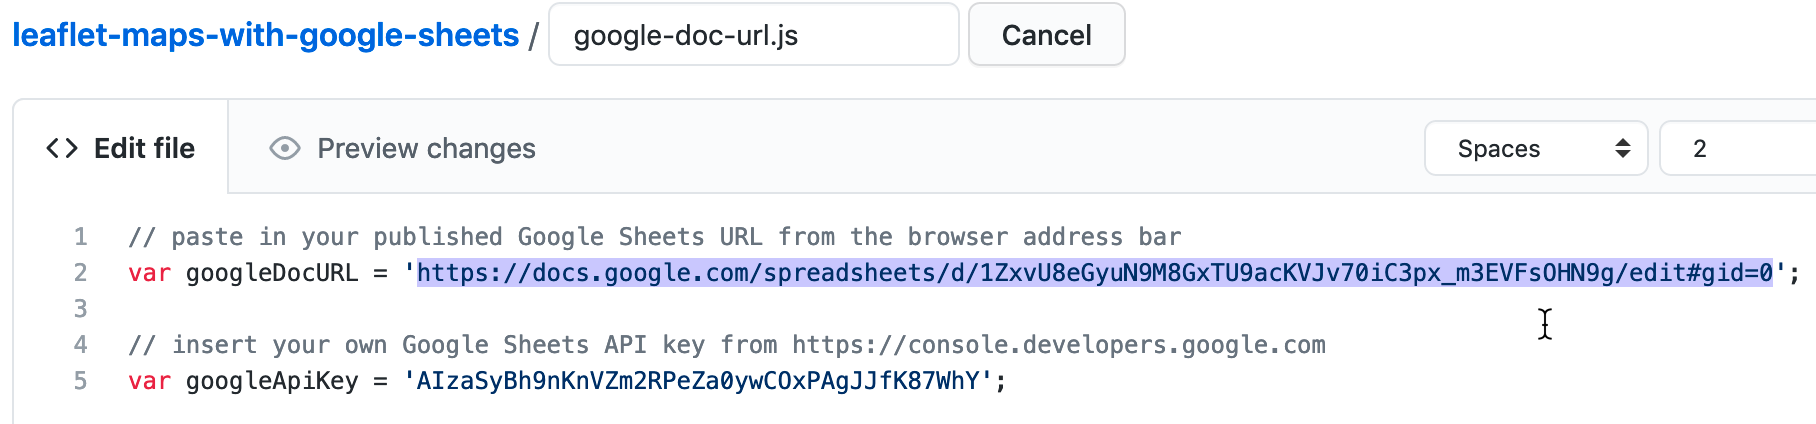 Paste in your Google Sheet URL to replace our URL.